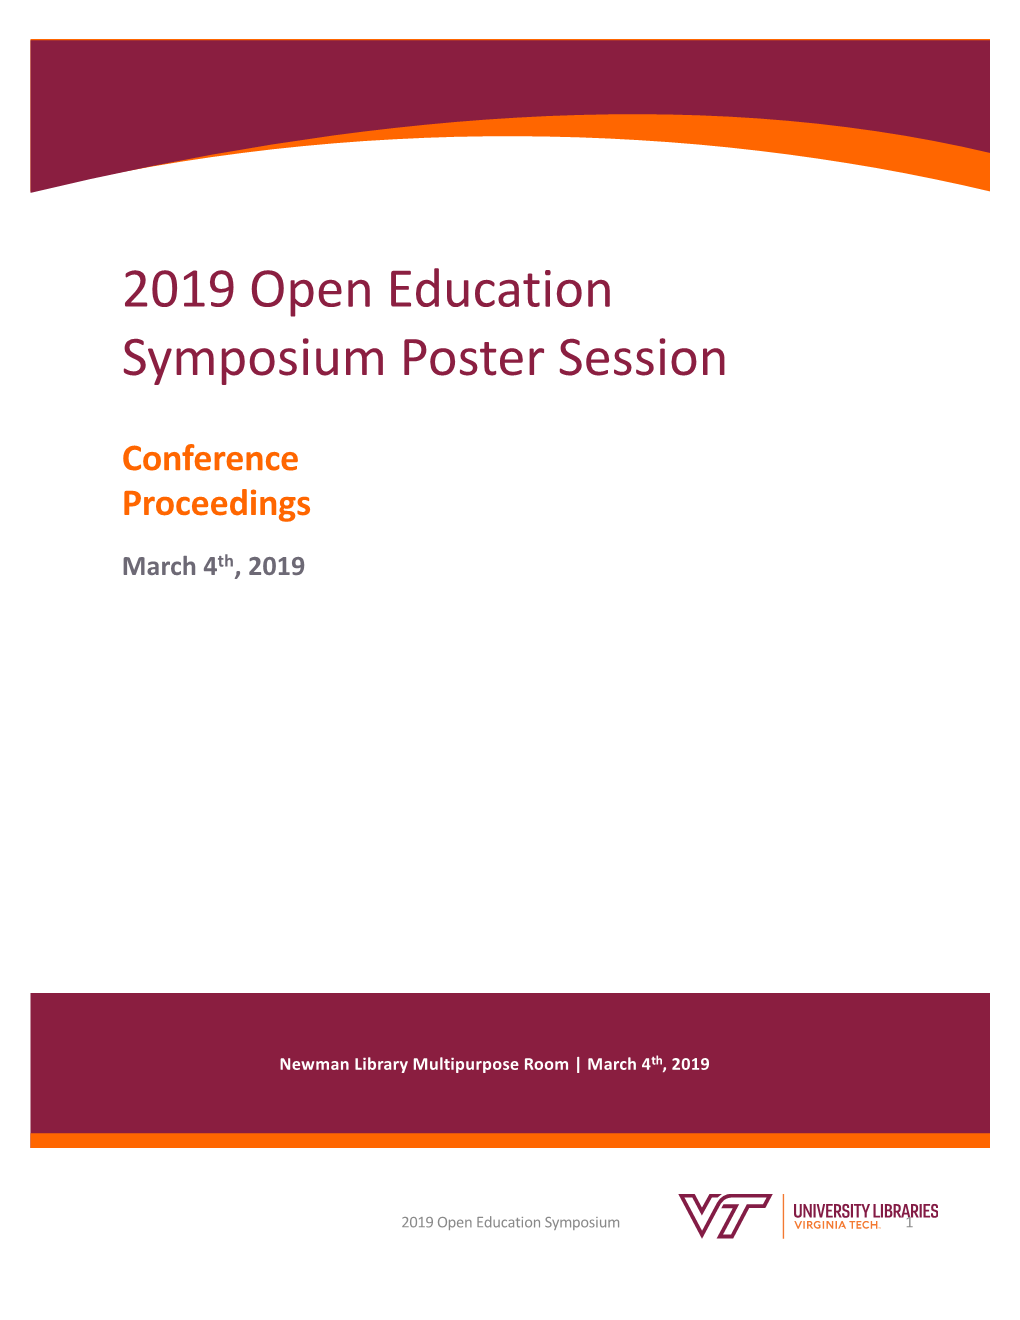 2019 Open Education Symposium Poster Session